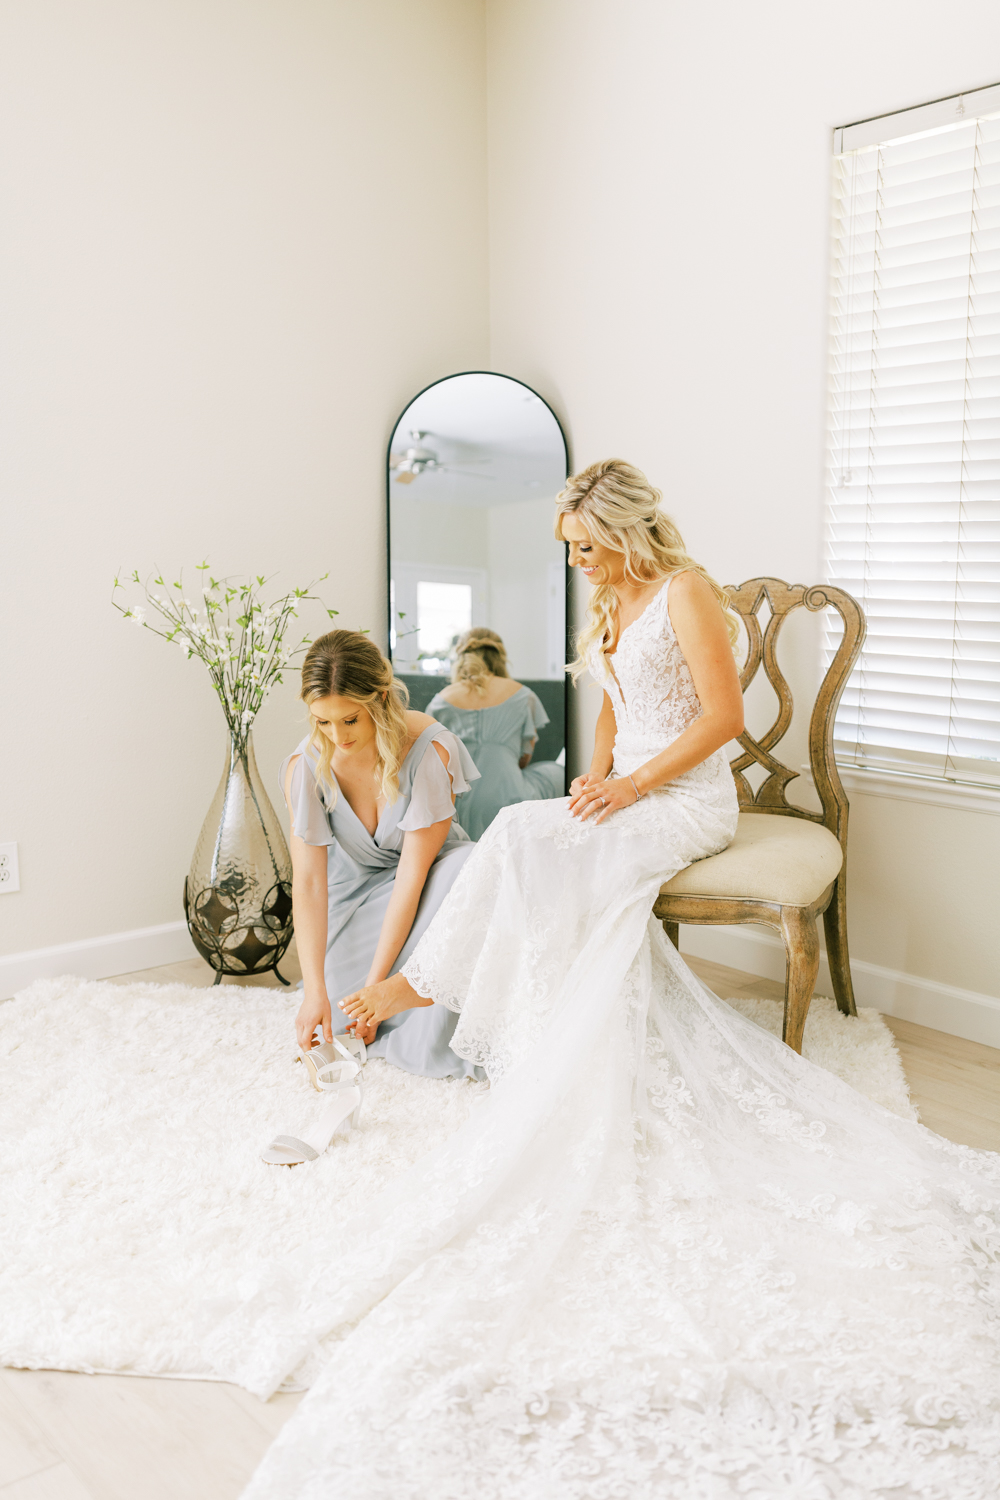 maid of honor helping bride put on wedding shoes